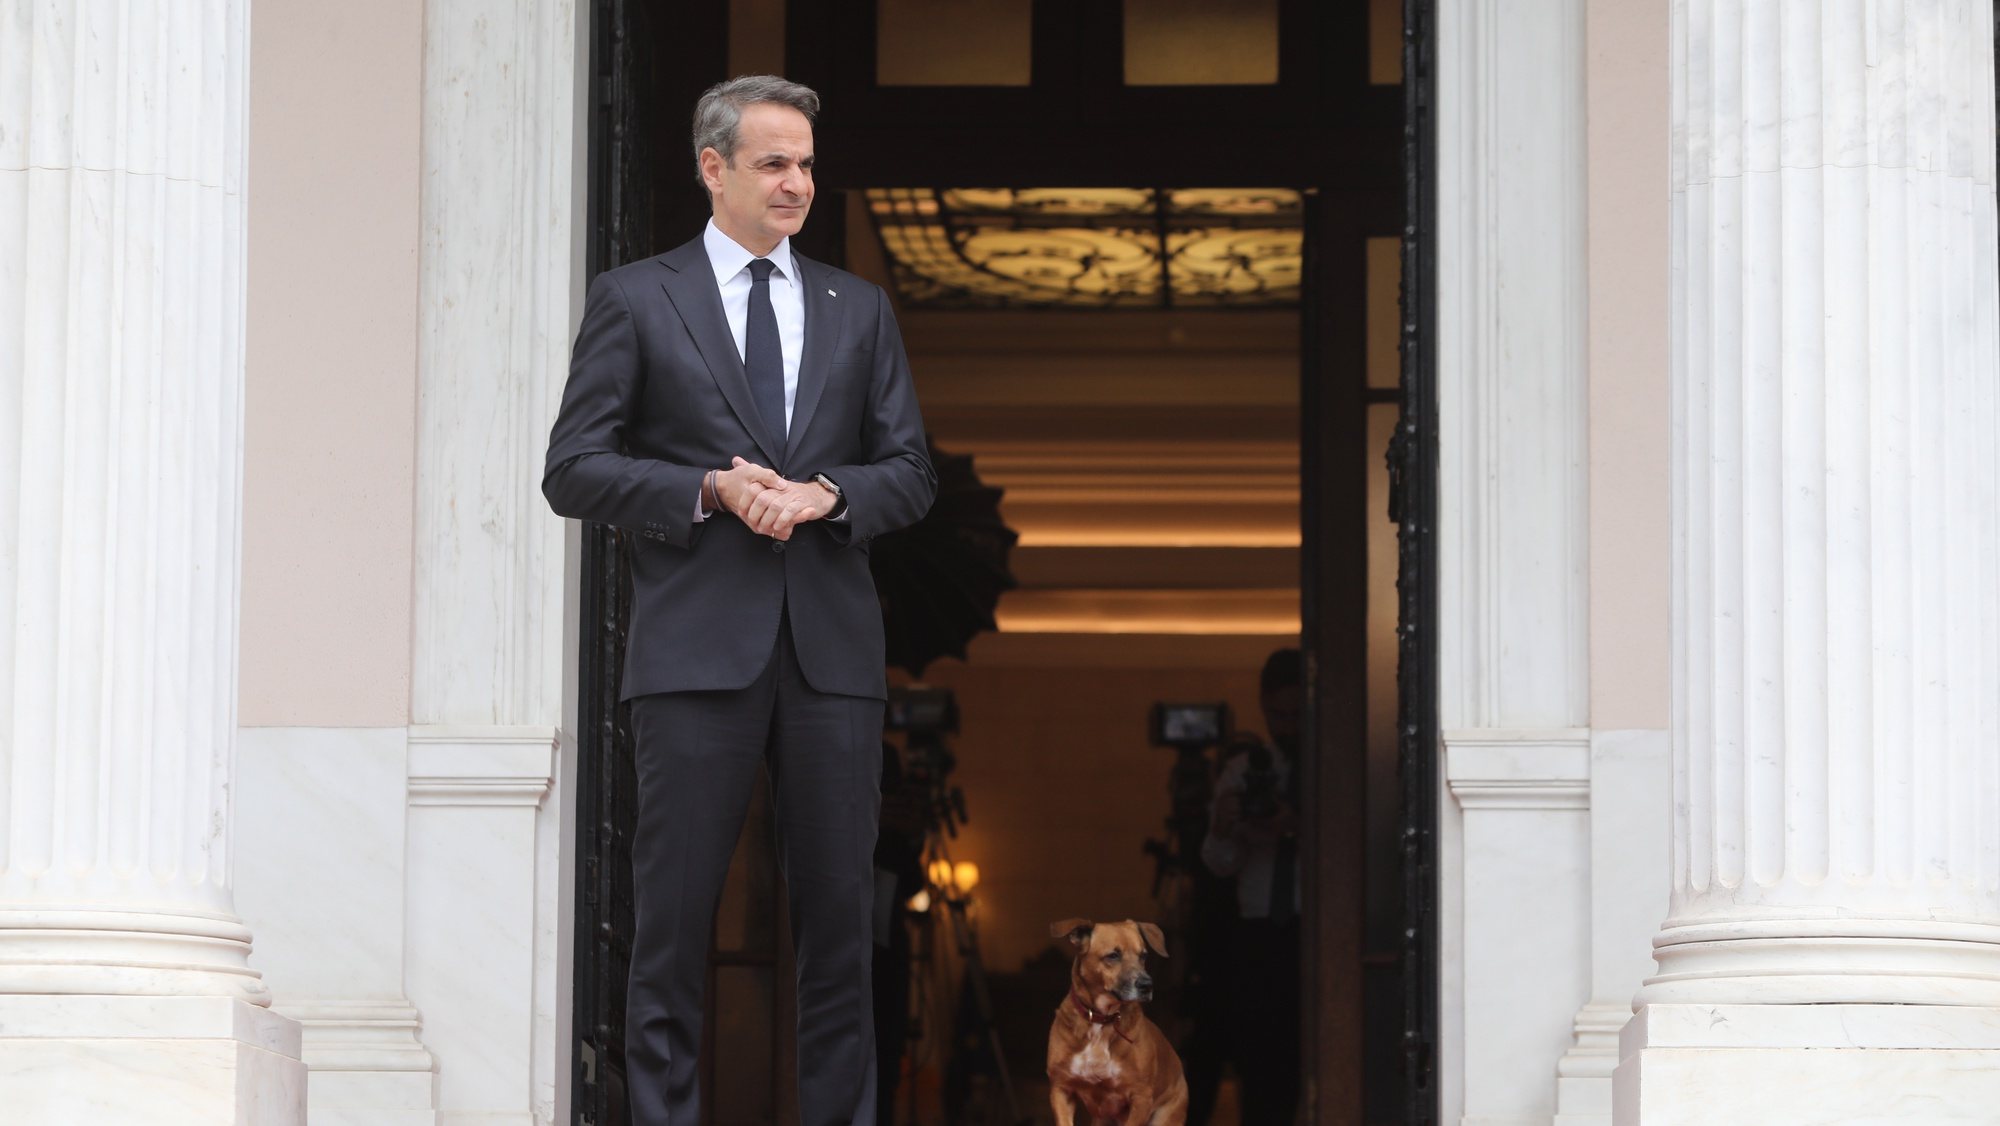 epa10520136 Greek Prime Minister Kyriakos Mitsotakis and his dog Peanut, wait to welcome the President of Cyprus in Maximos Mansion, Athens, Greece, 13 March 2023. Newly elected President of the Republic of Cyprus Nikos Christodoulides is paying his first official visit to Athens between 12 and 14 March.  EPA/GEORGE VITSARAS